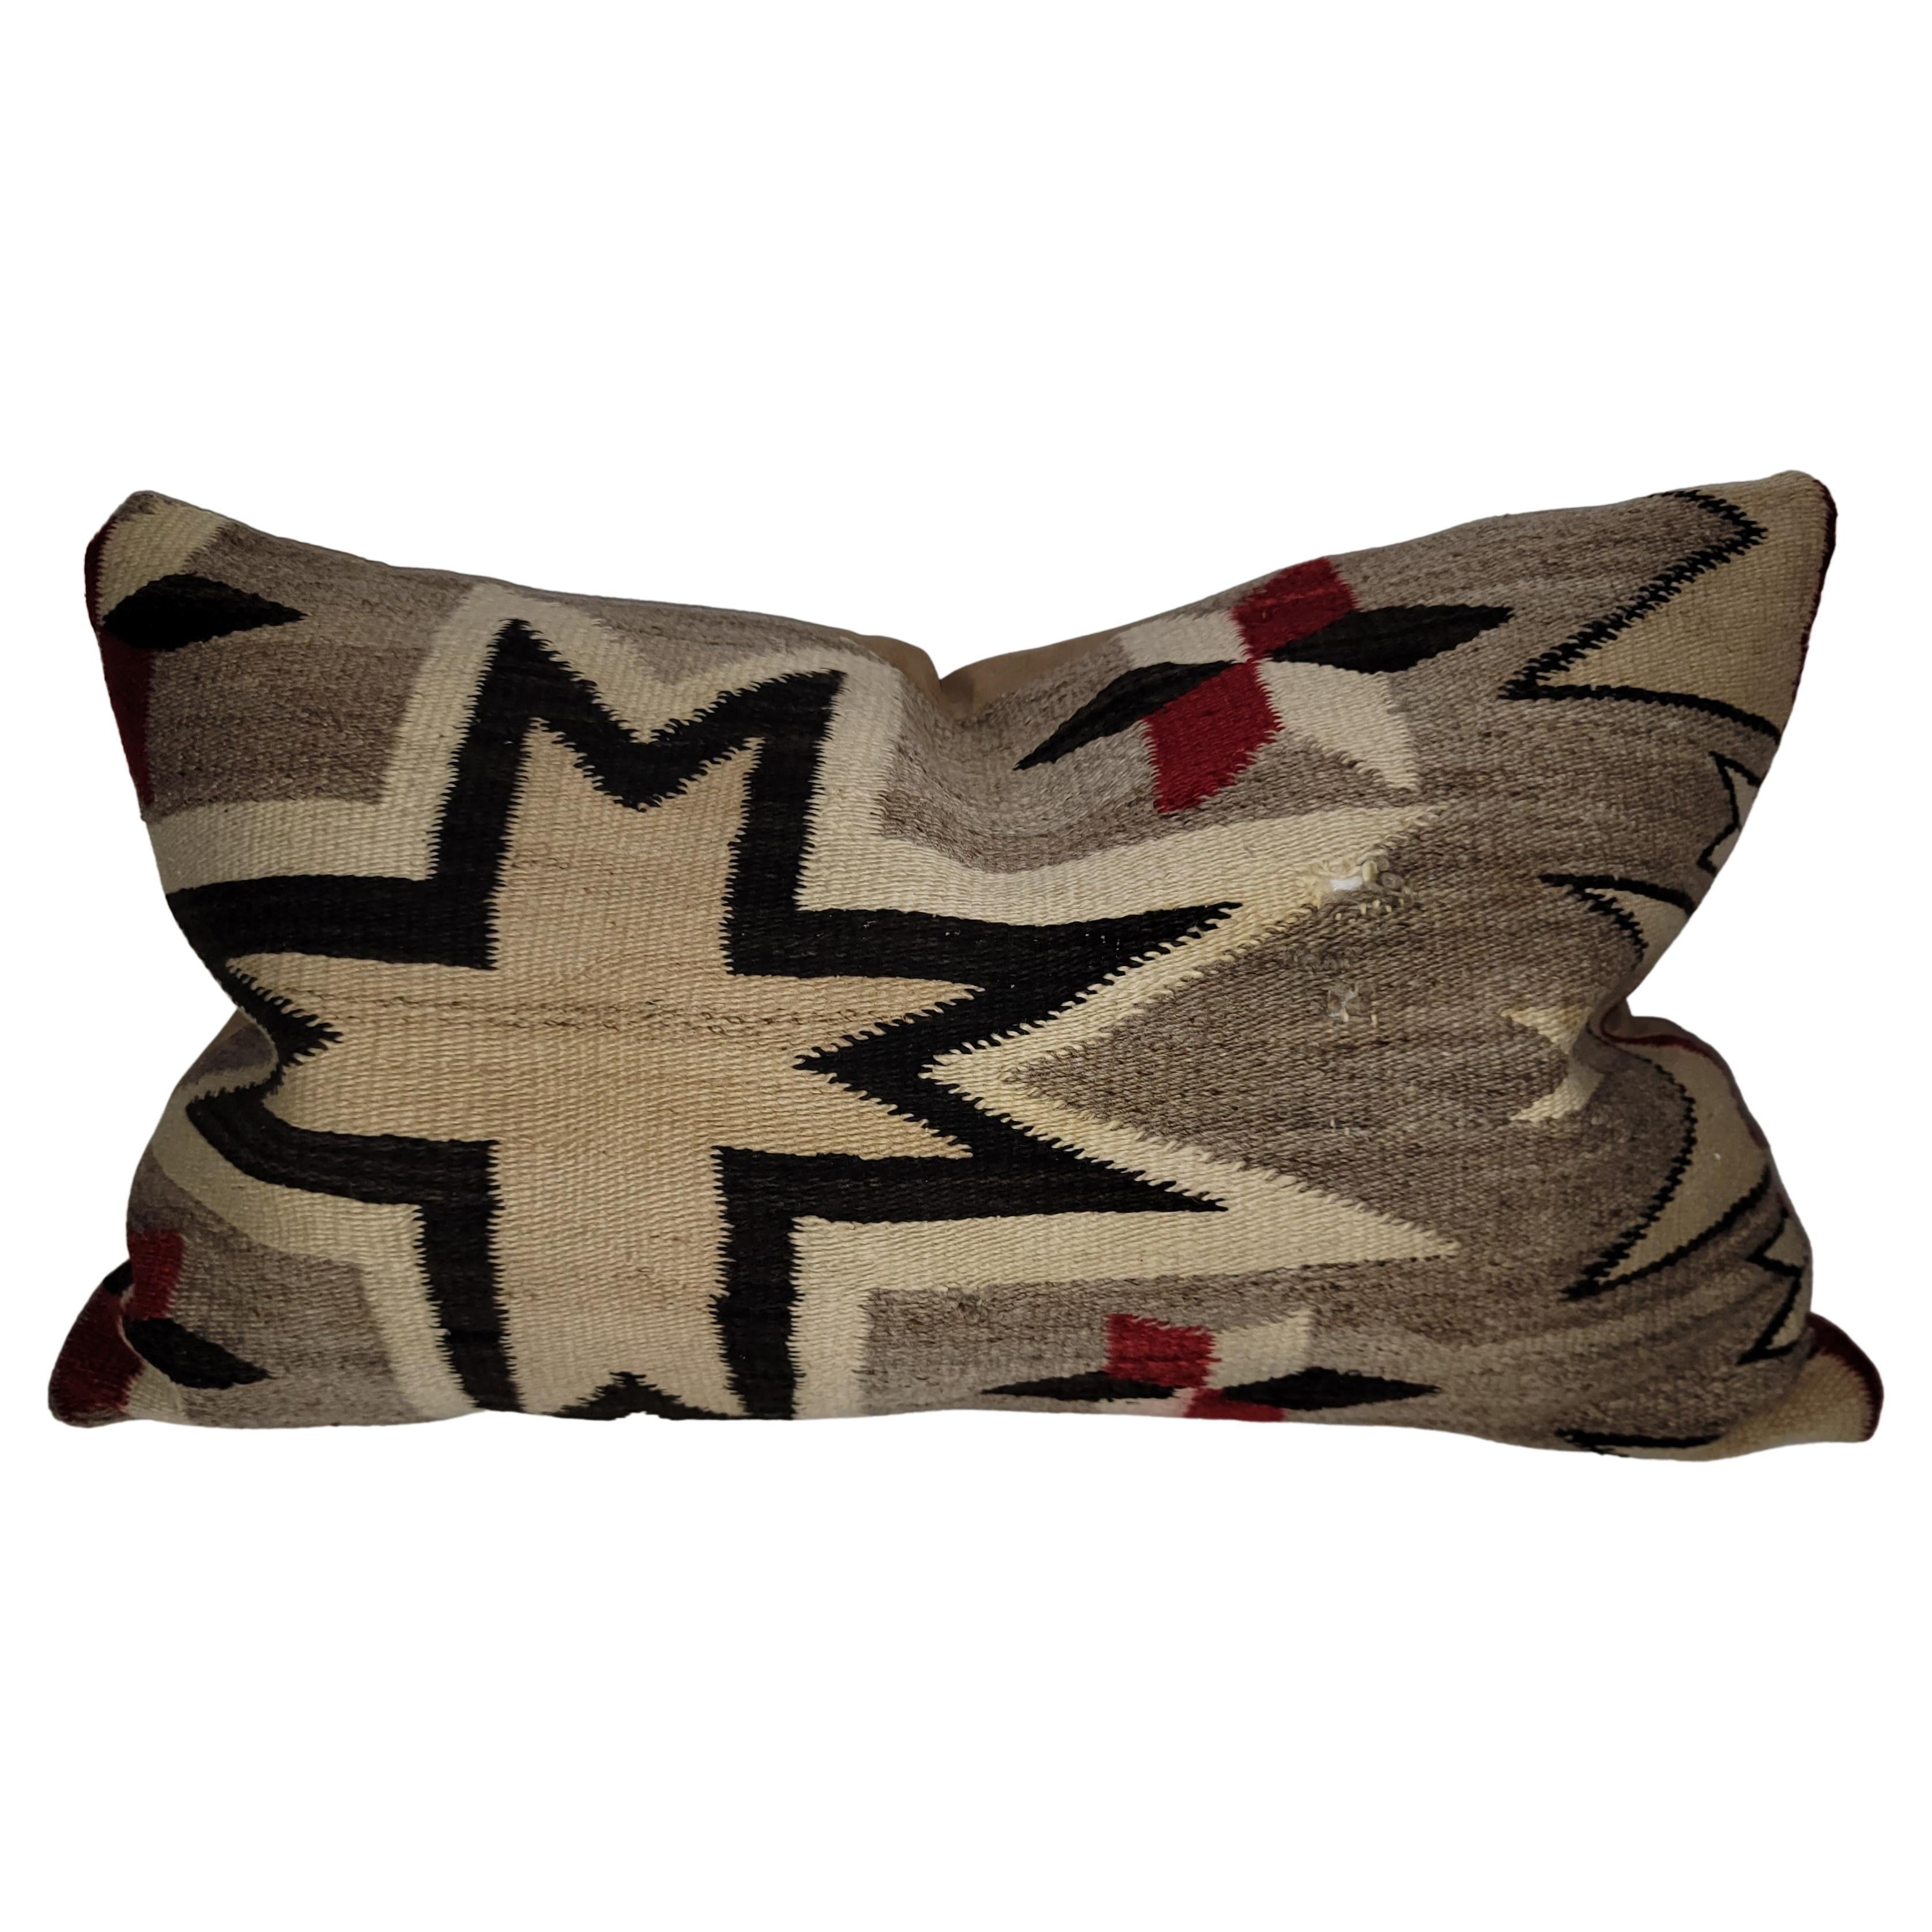 Early Navajo Indian Weaving Star Dazzler Bolster Pillow